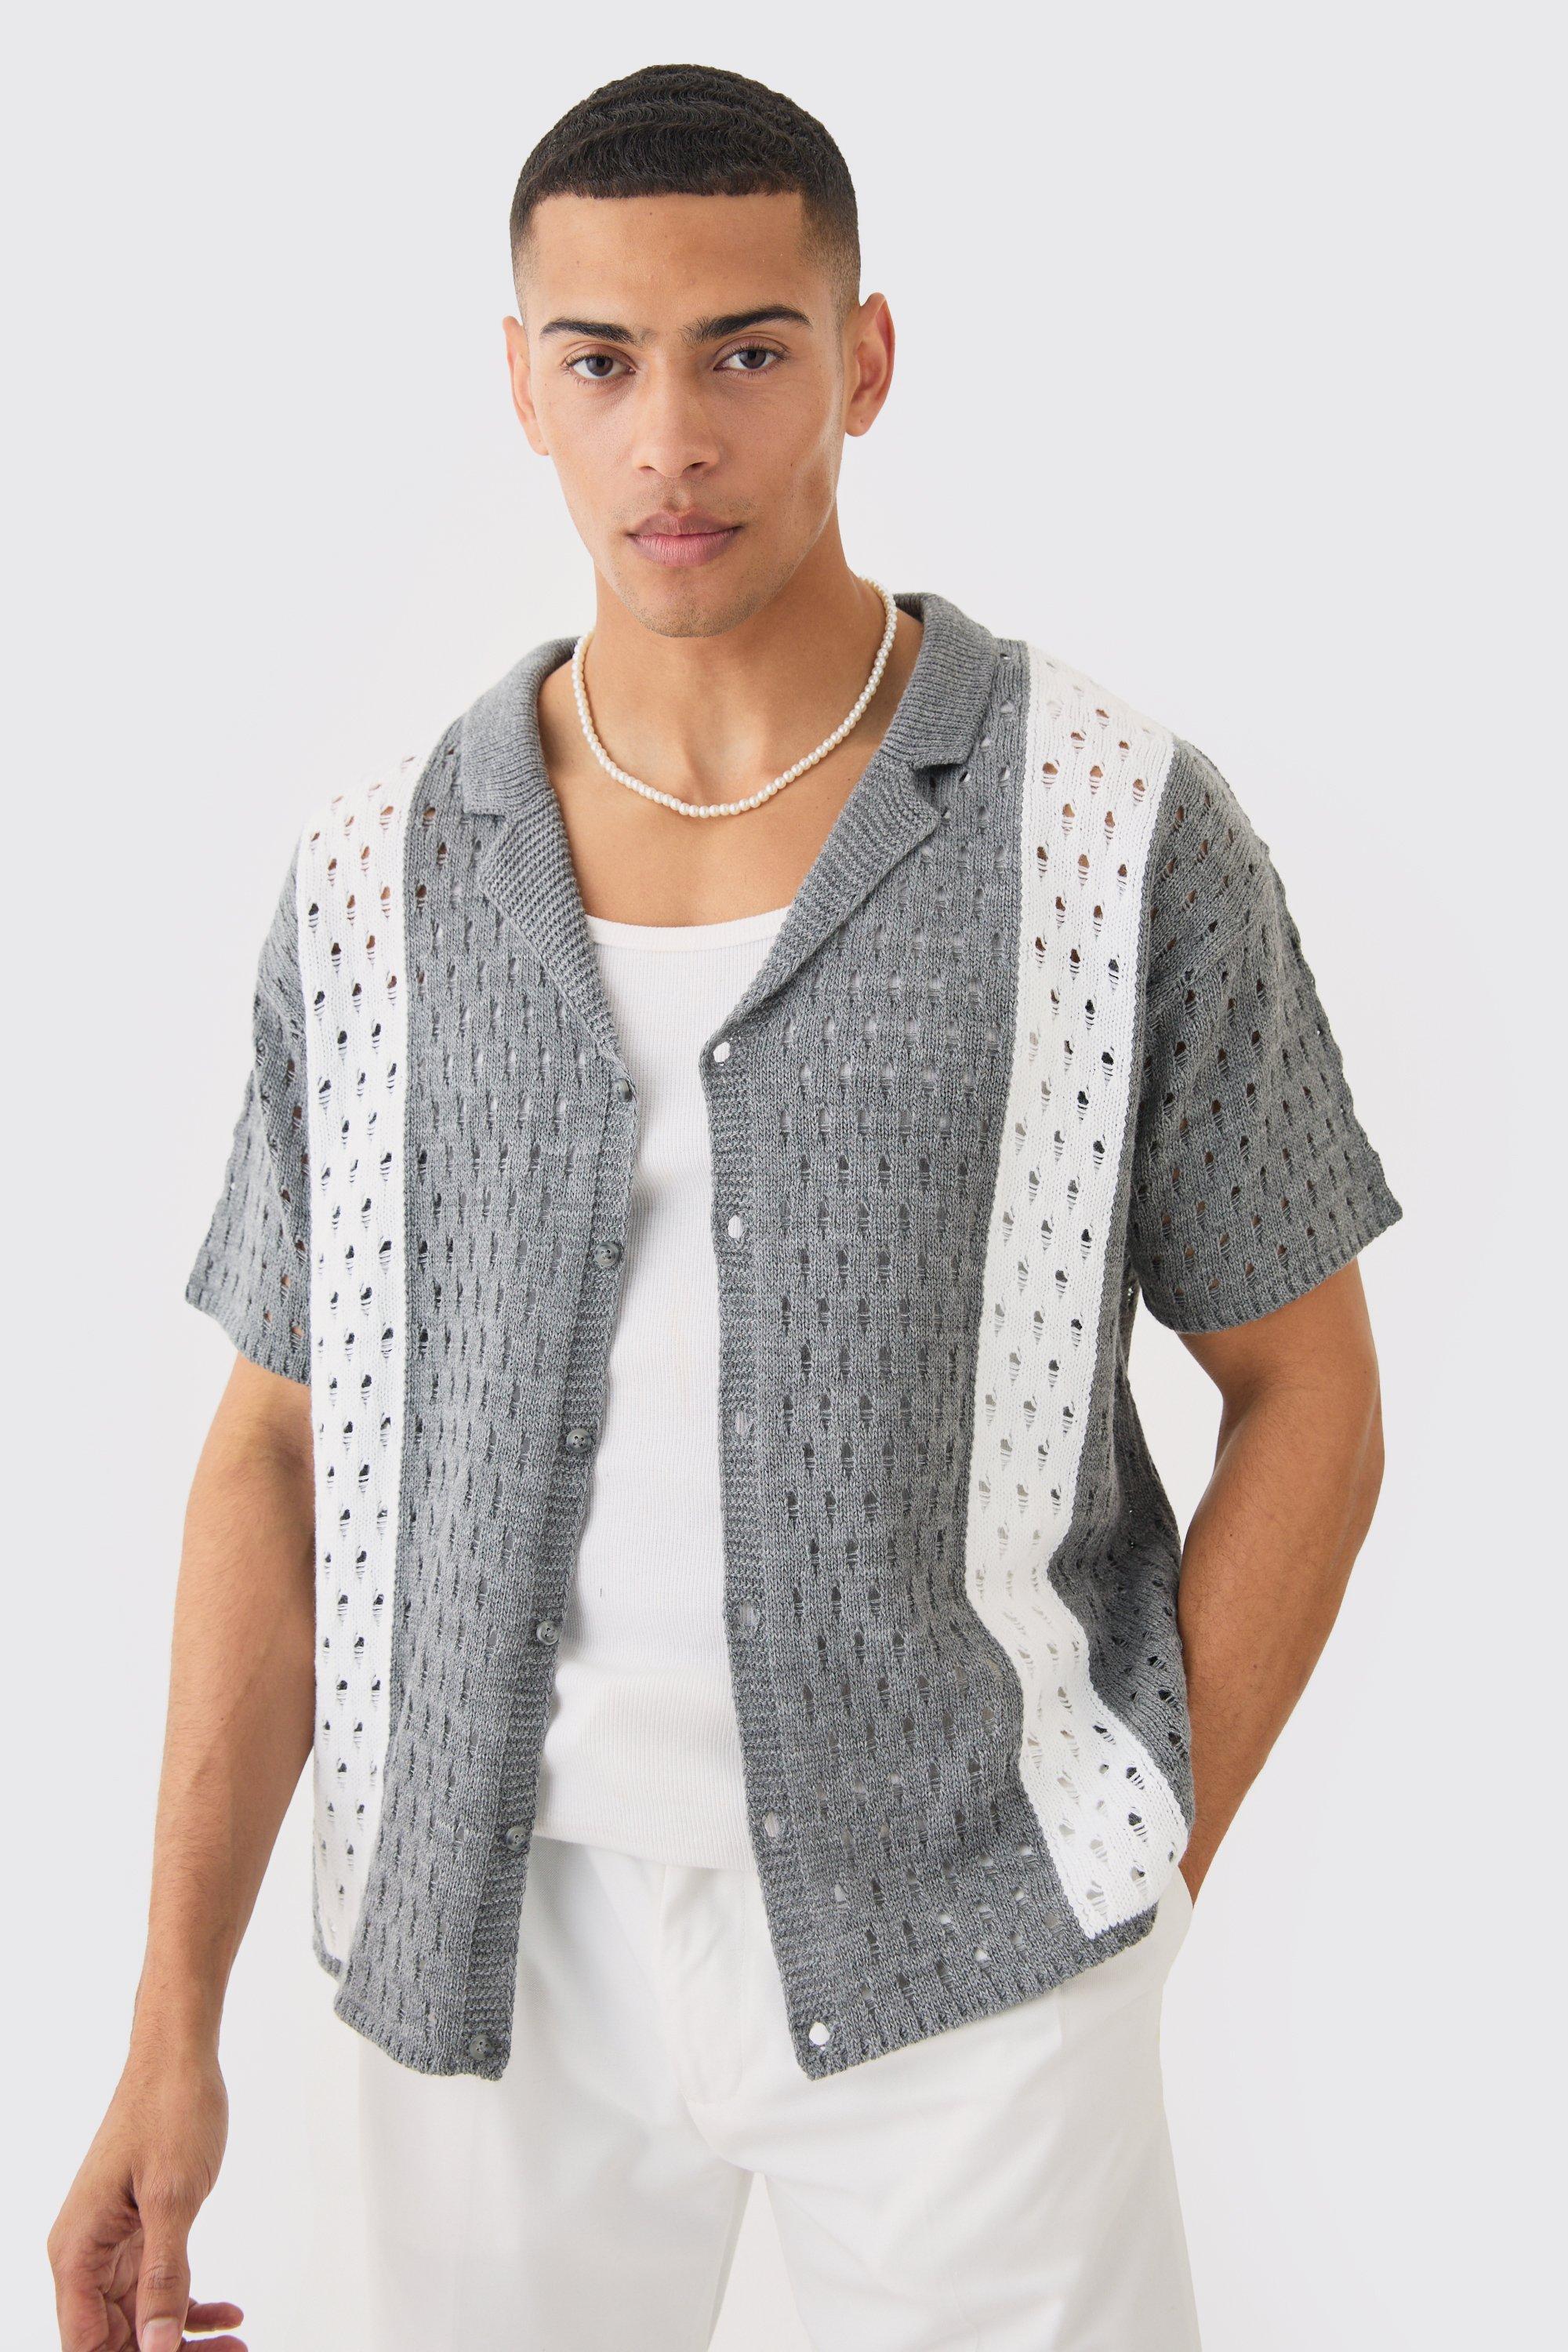 Image of        Oversized Boxy Open Stitch Stripe Knit Shirt In Charcoal, Grigio